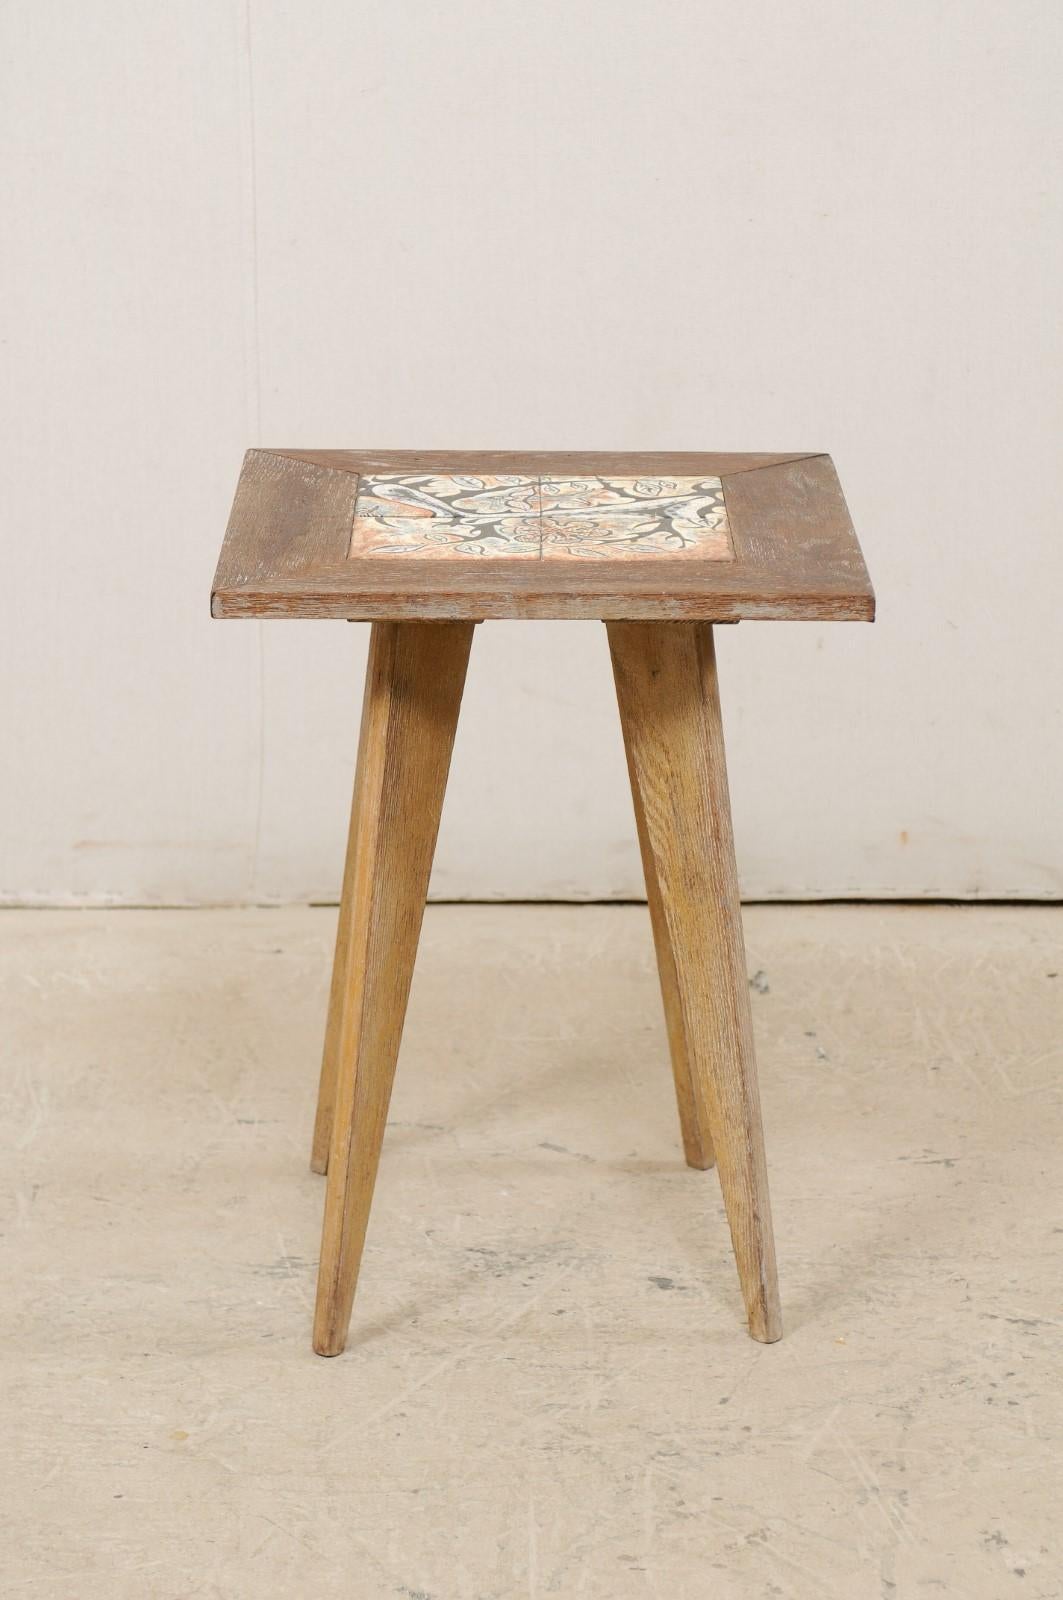 Wood Midcentury Side Table with Painted Tile Top Attributed to Anton Refreiger